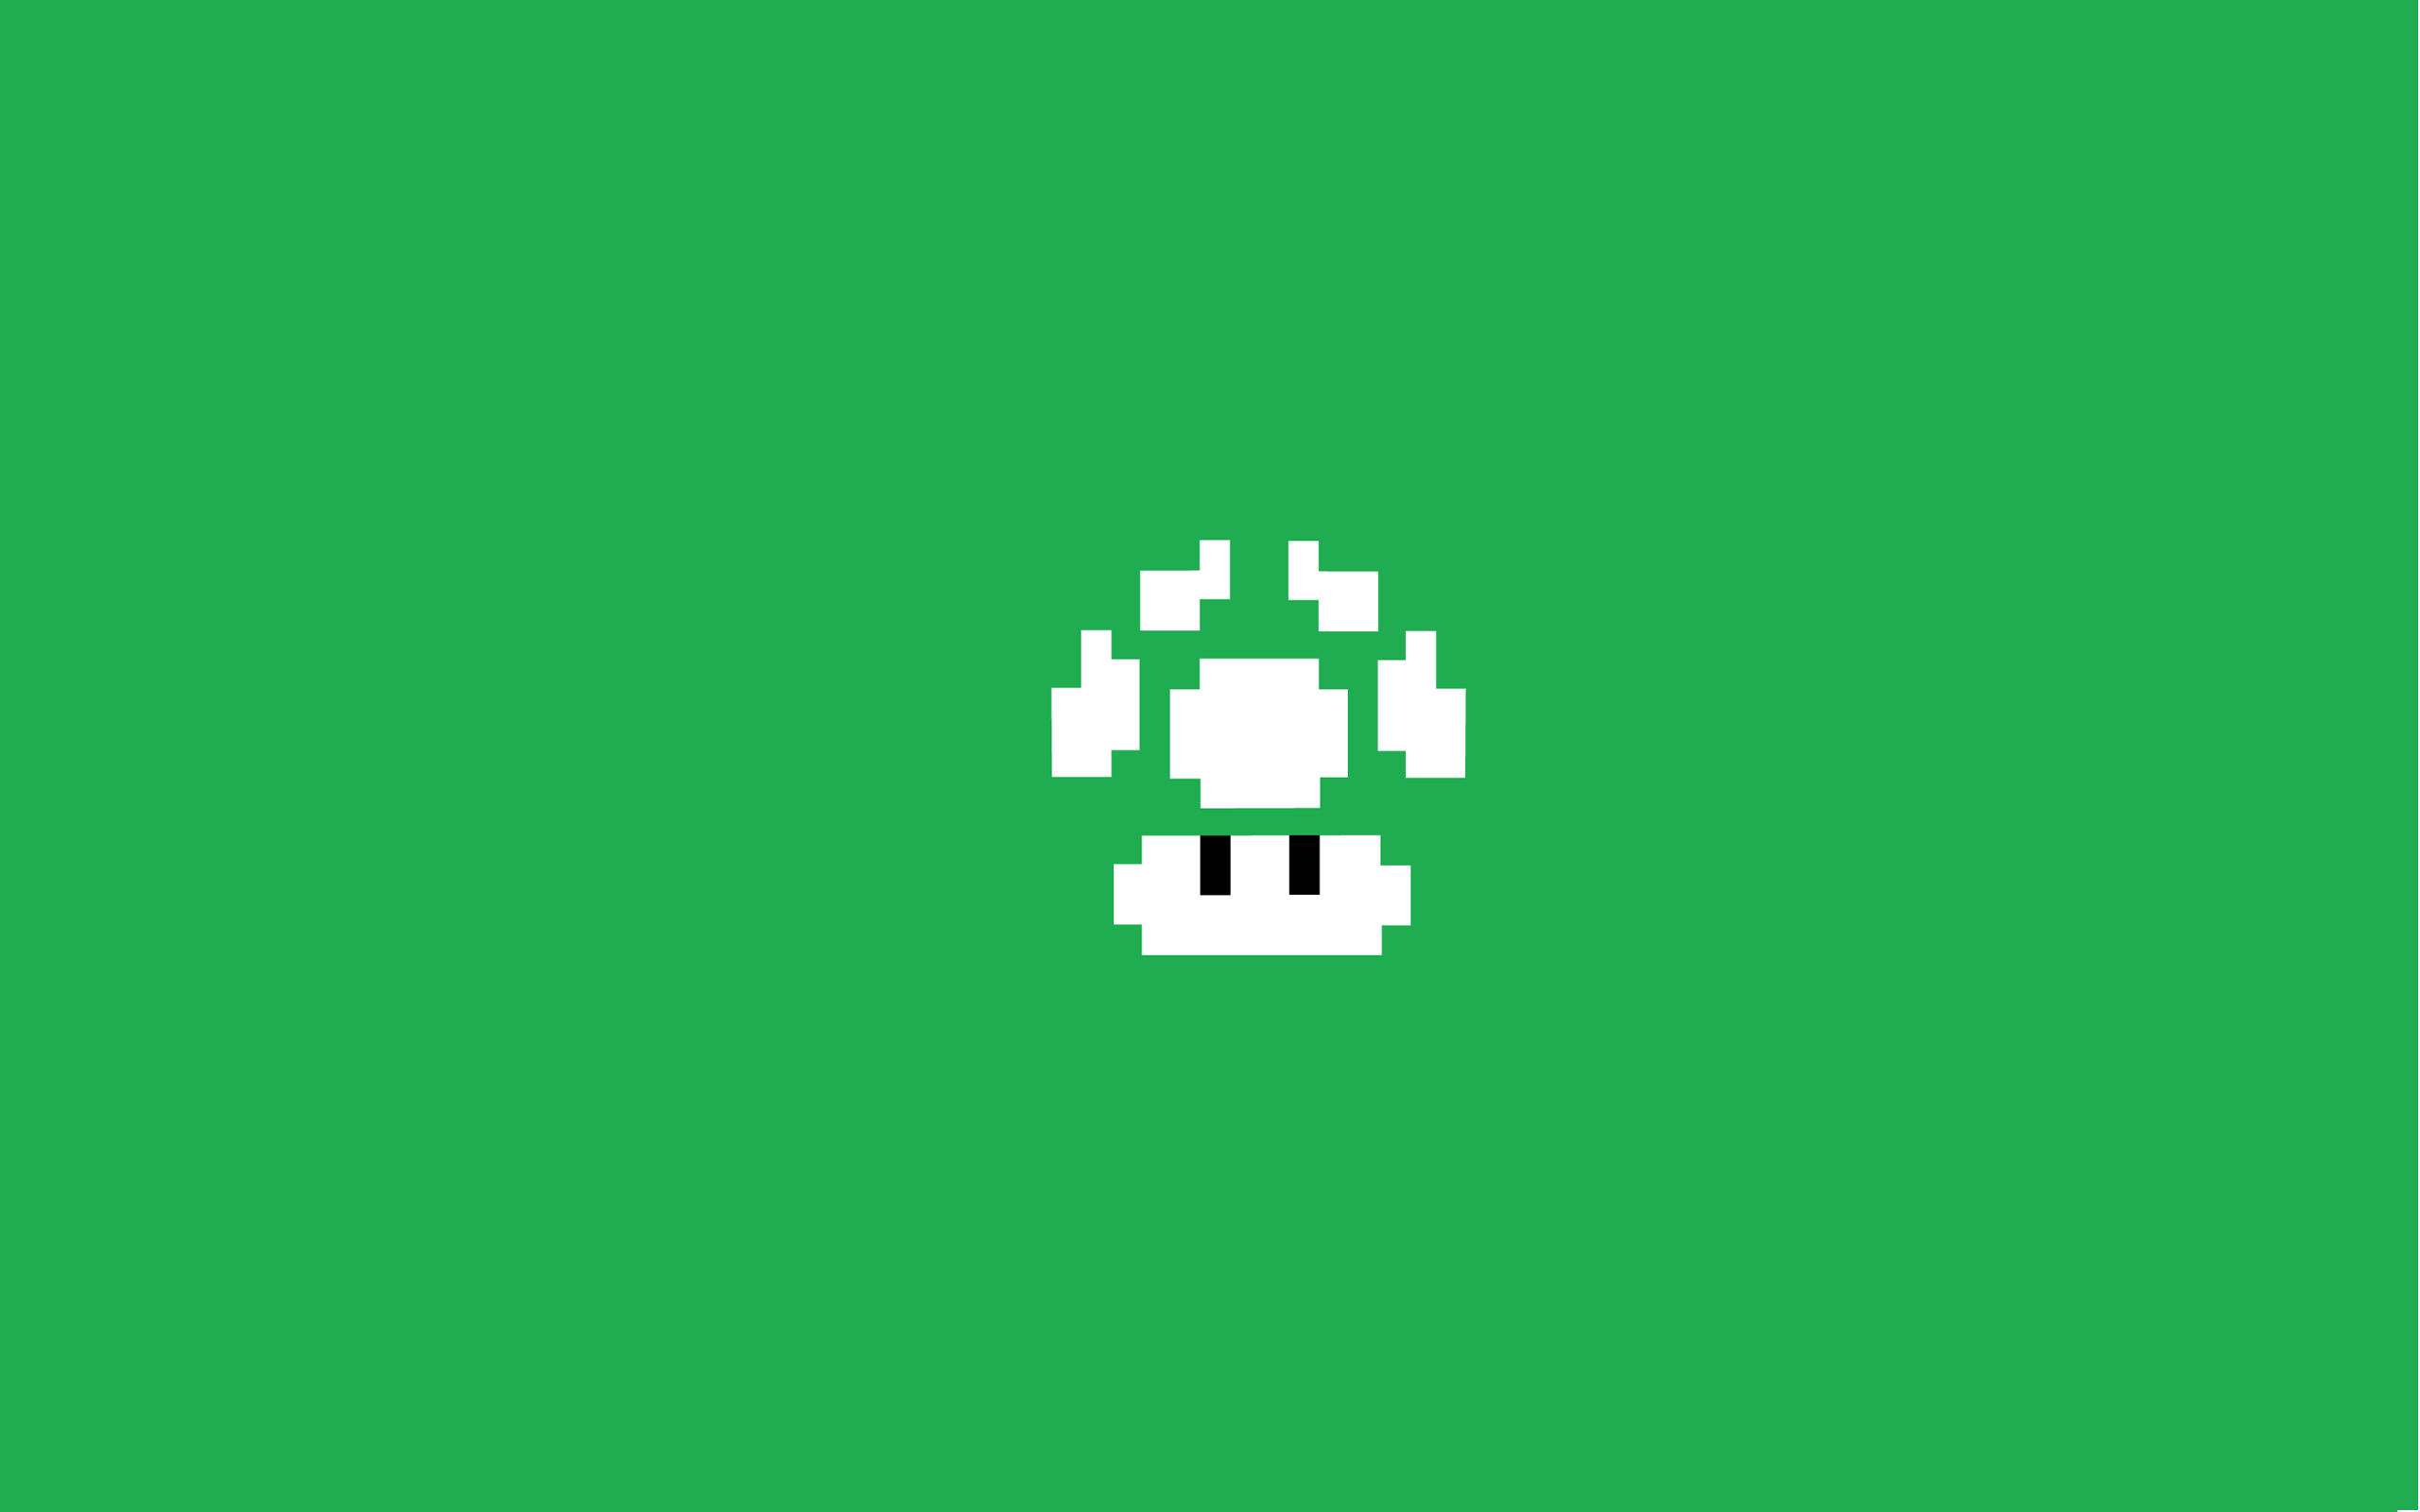 Figure on a green background, Super Mario Bros wallpapers and other